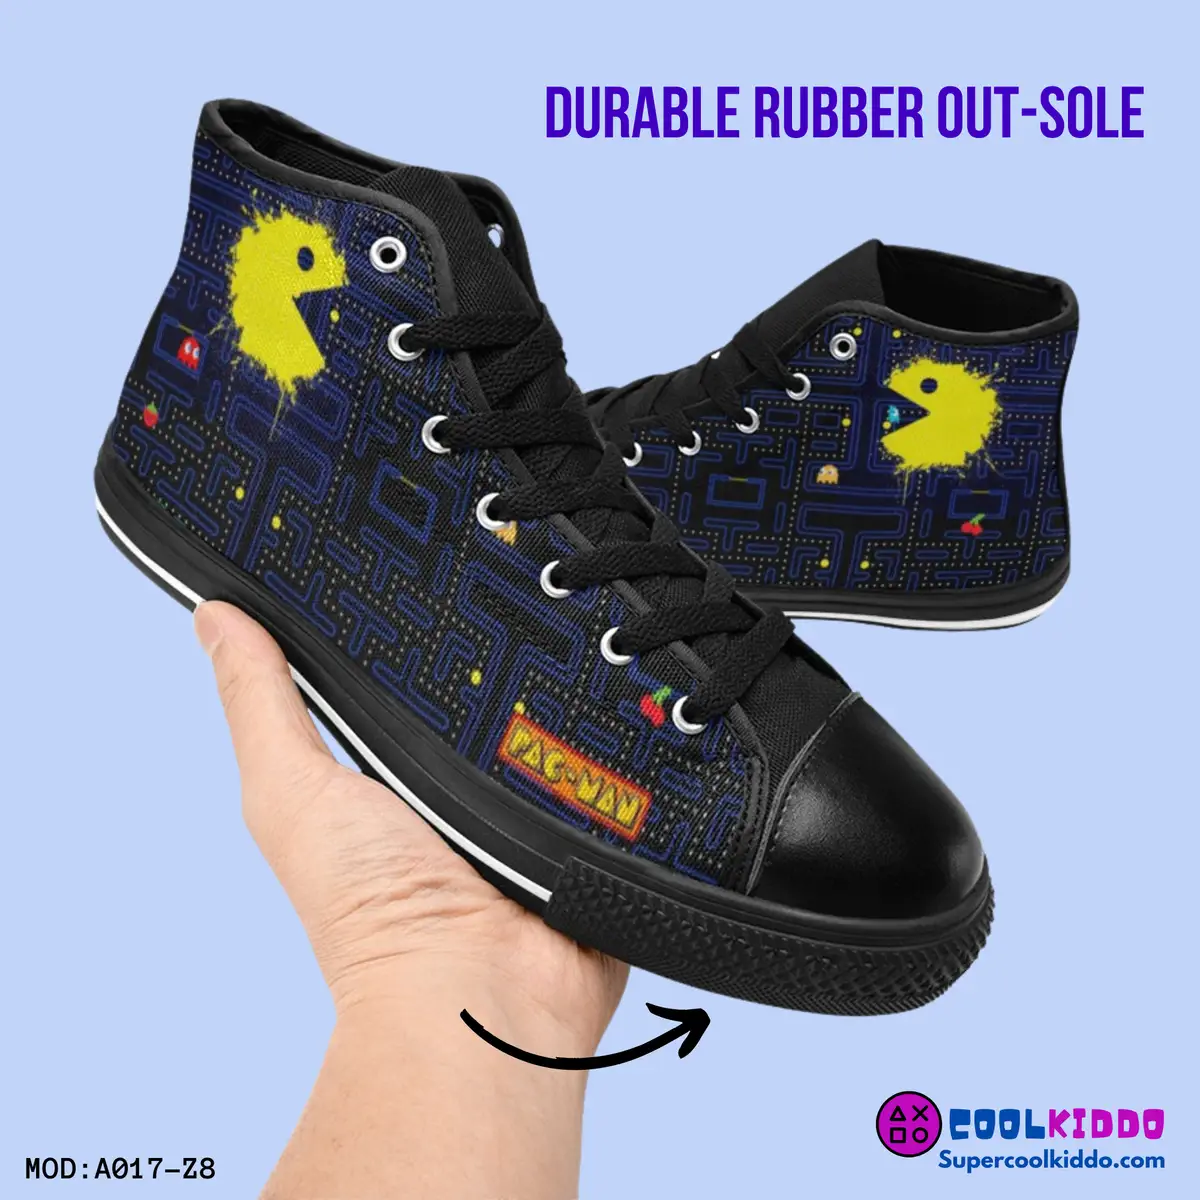 Pac Man Vintage Video Game High Top Sneakers – Custom Canvas Shoes for Kids/Youth Cool Kiddo 10